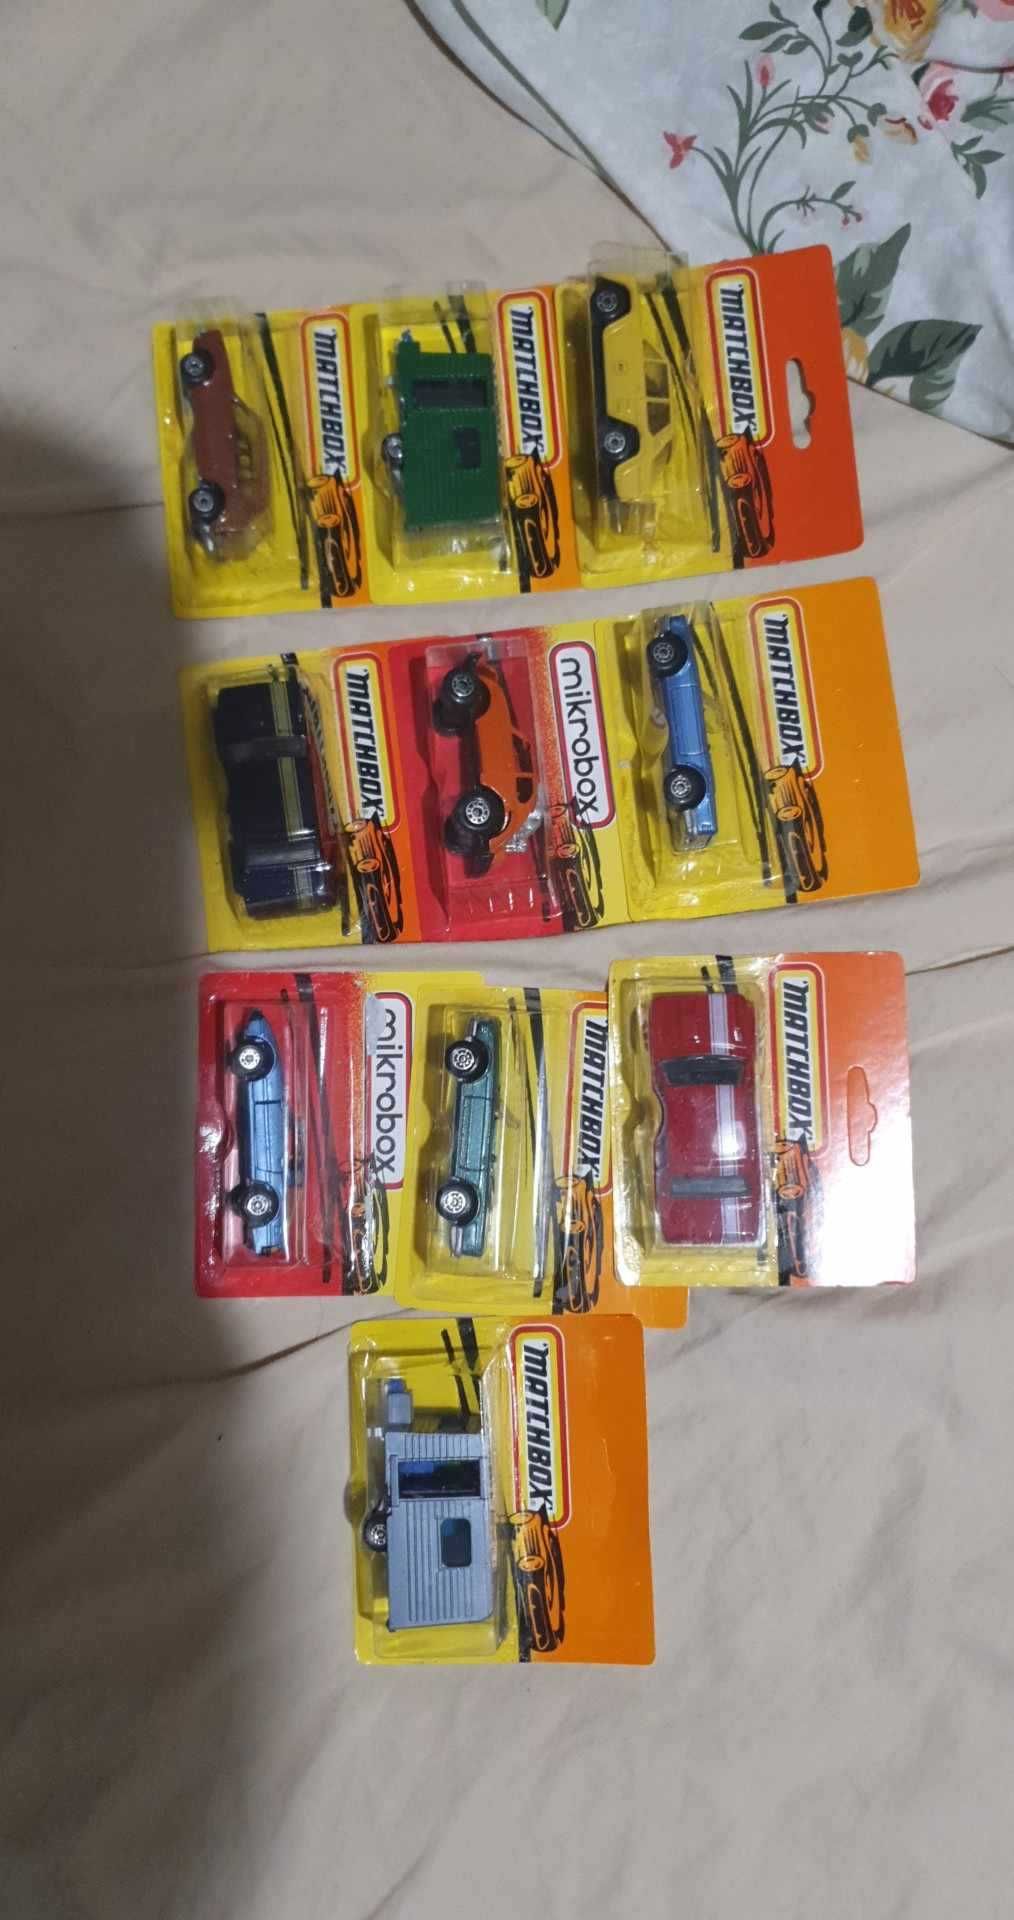 Matchbox  cars with blisters